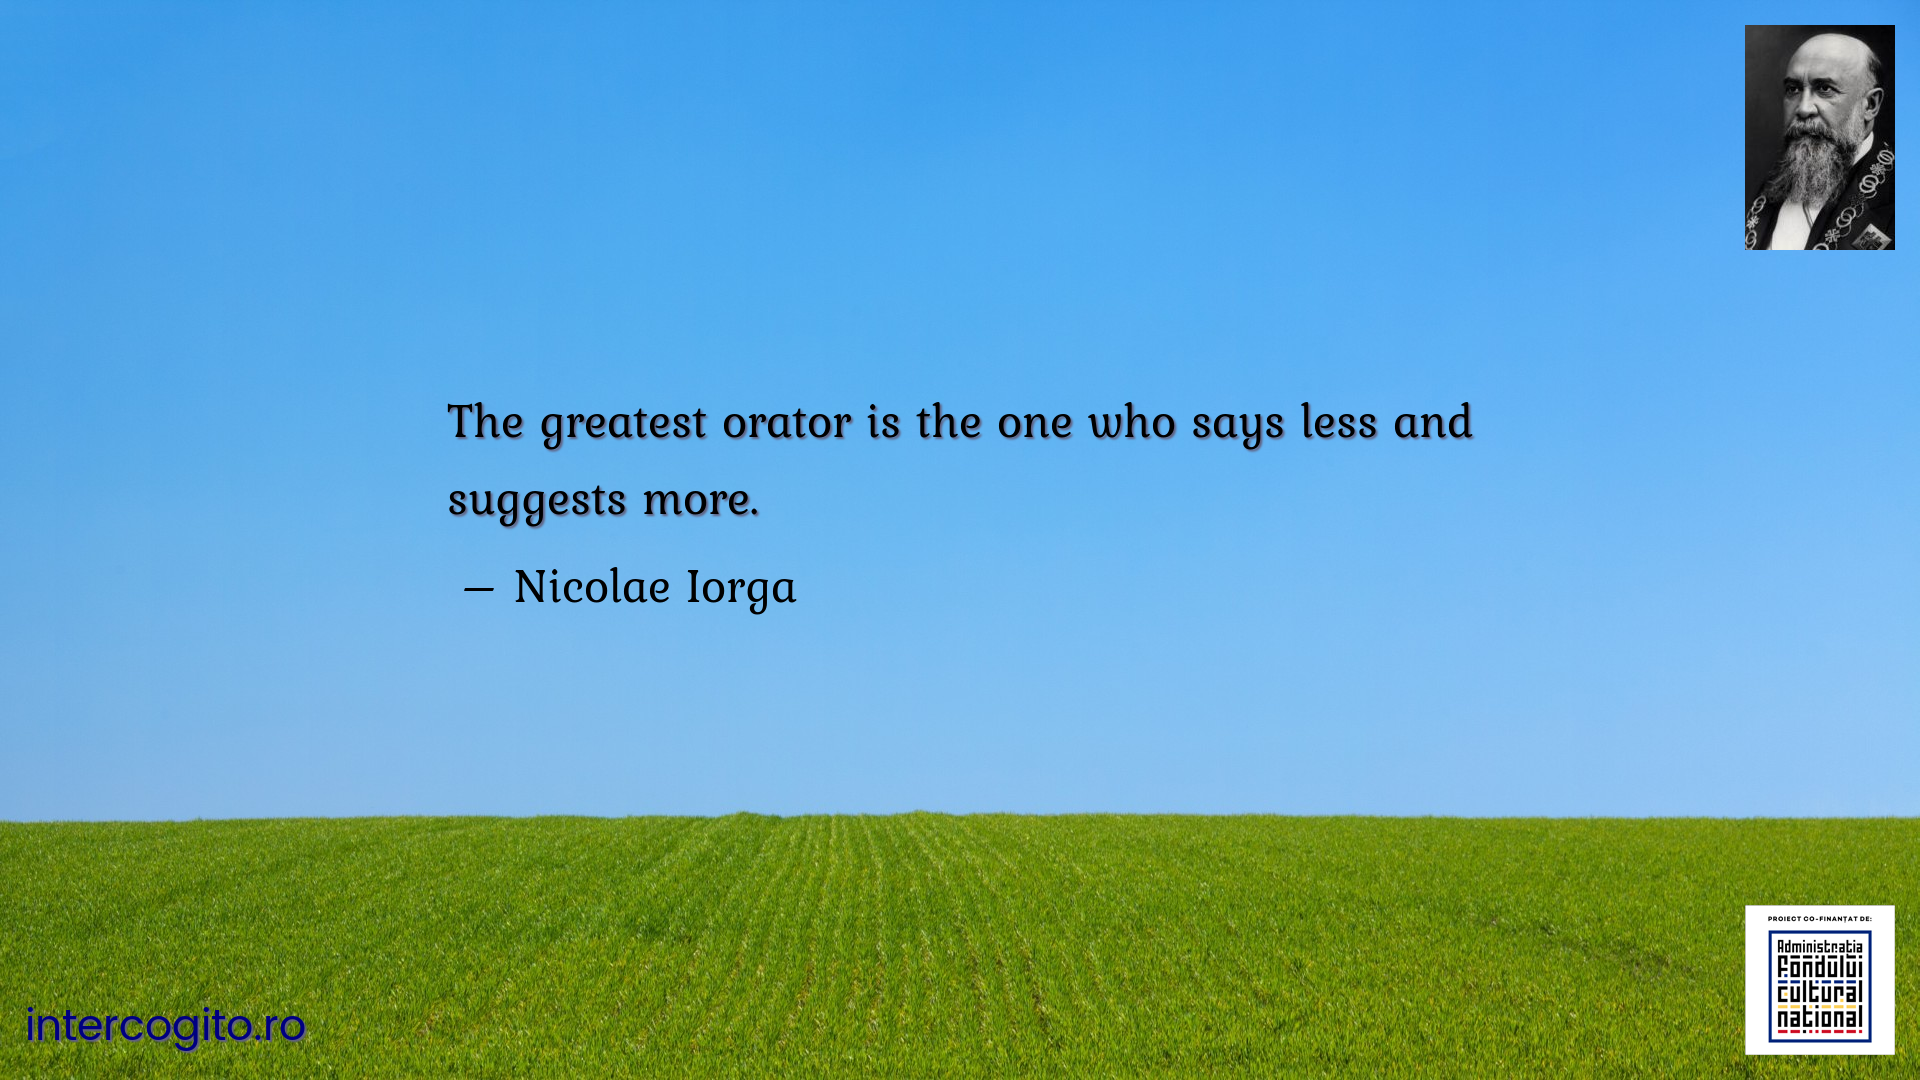 The greatest orator is the one who says less and suggests more.